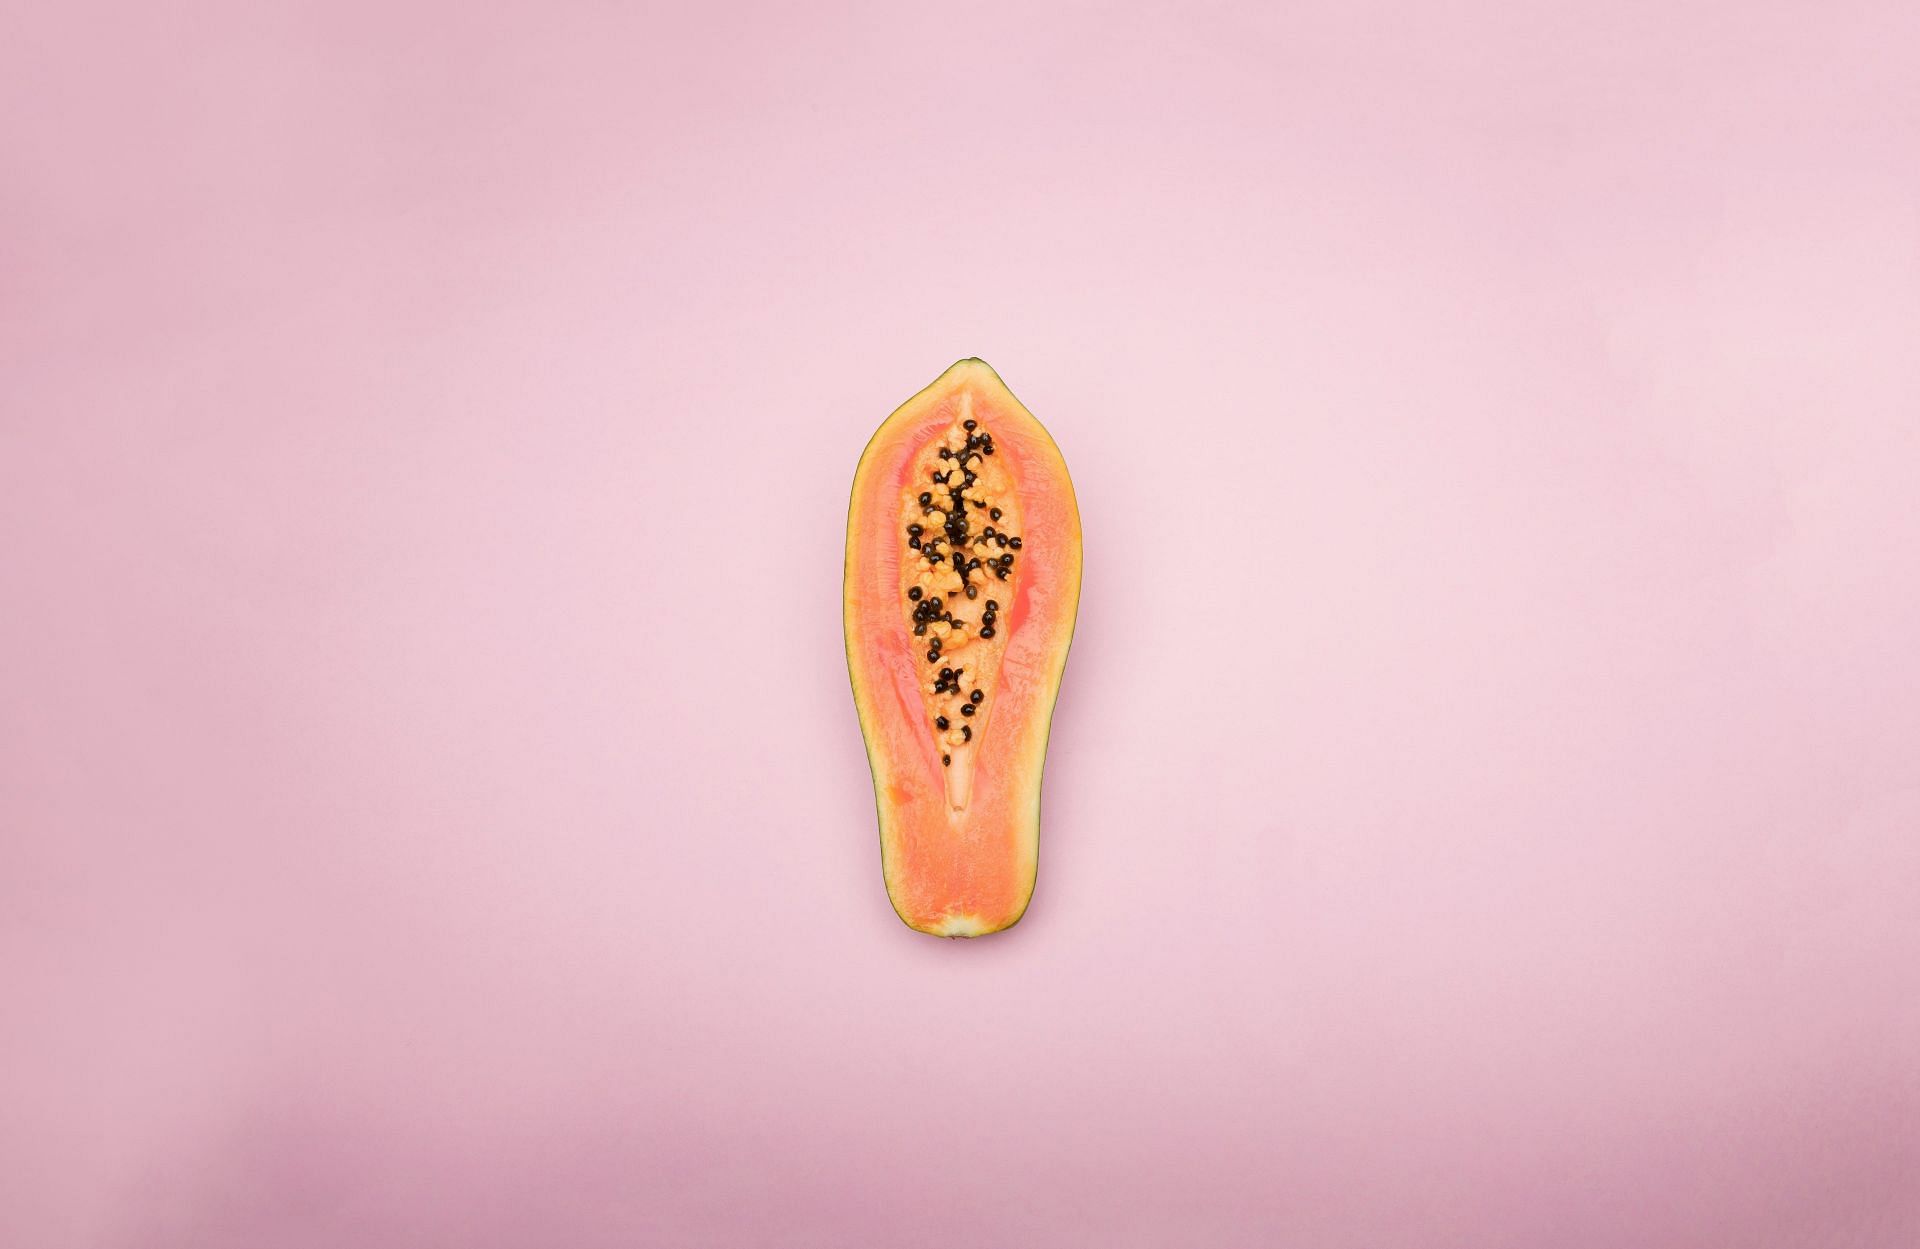 Ovulation: An important part of the menstrual cycle(Image by Deon Black/Unsplash)